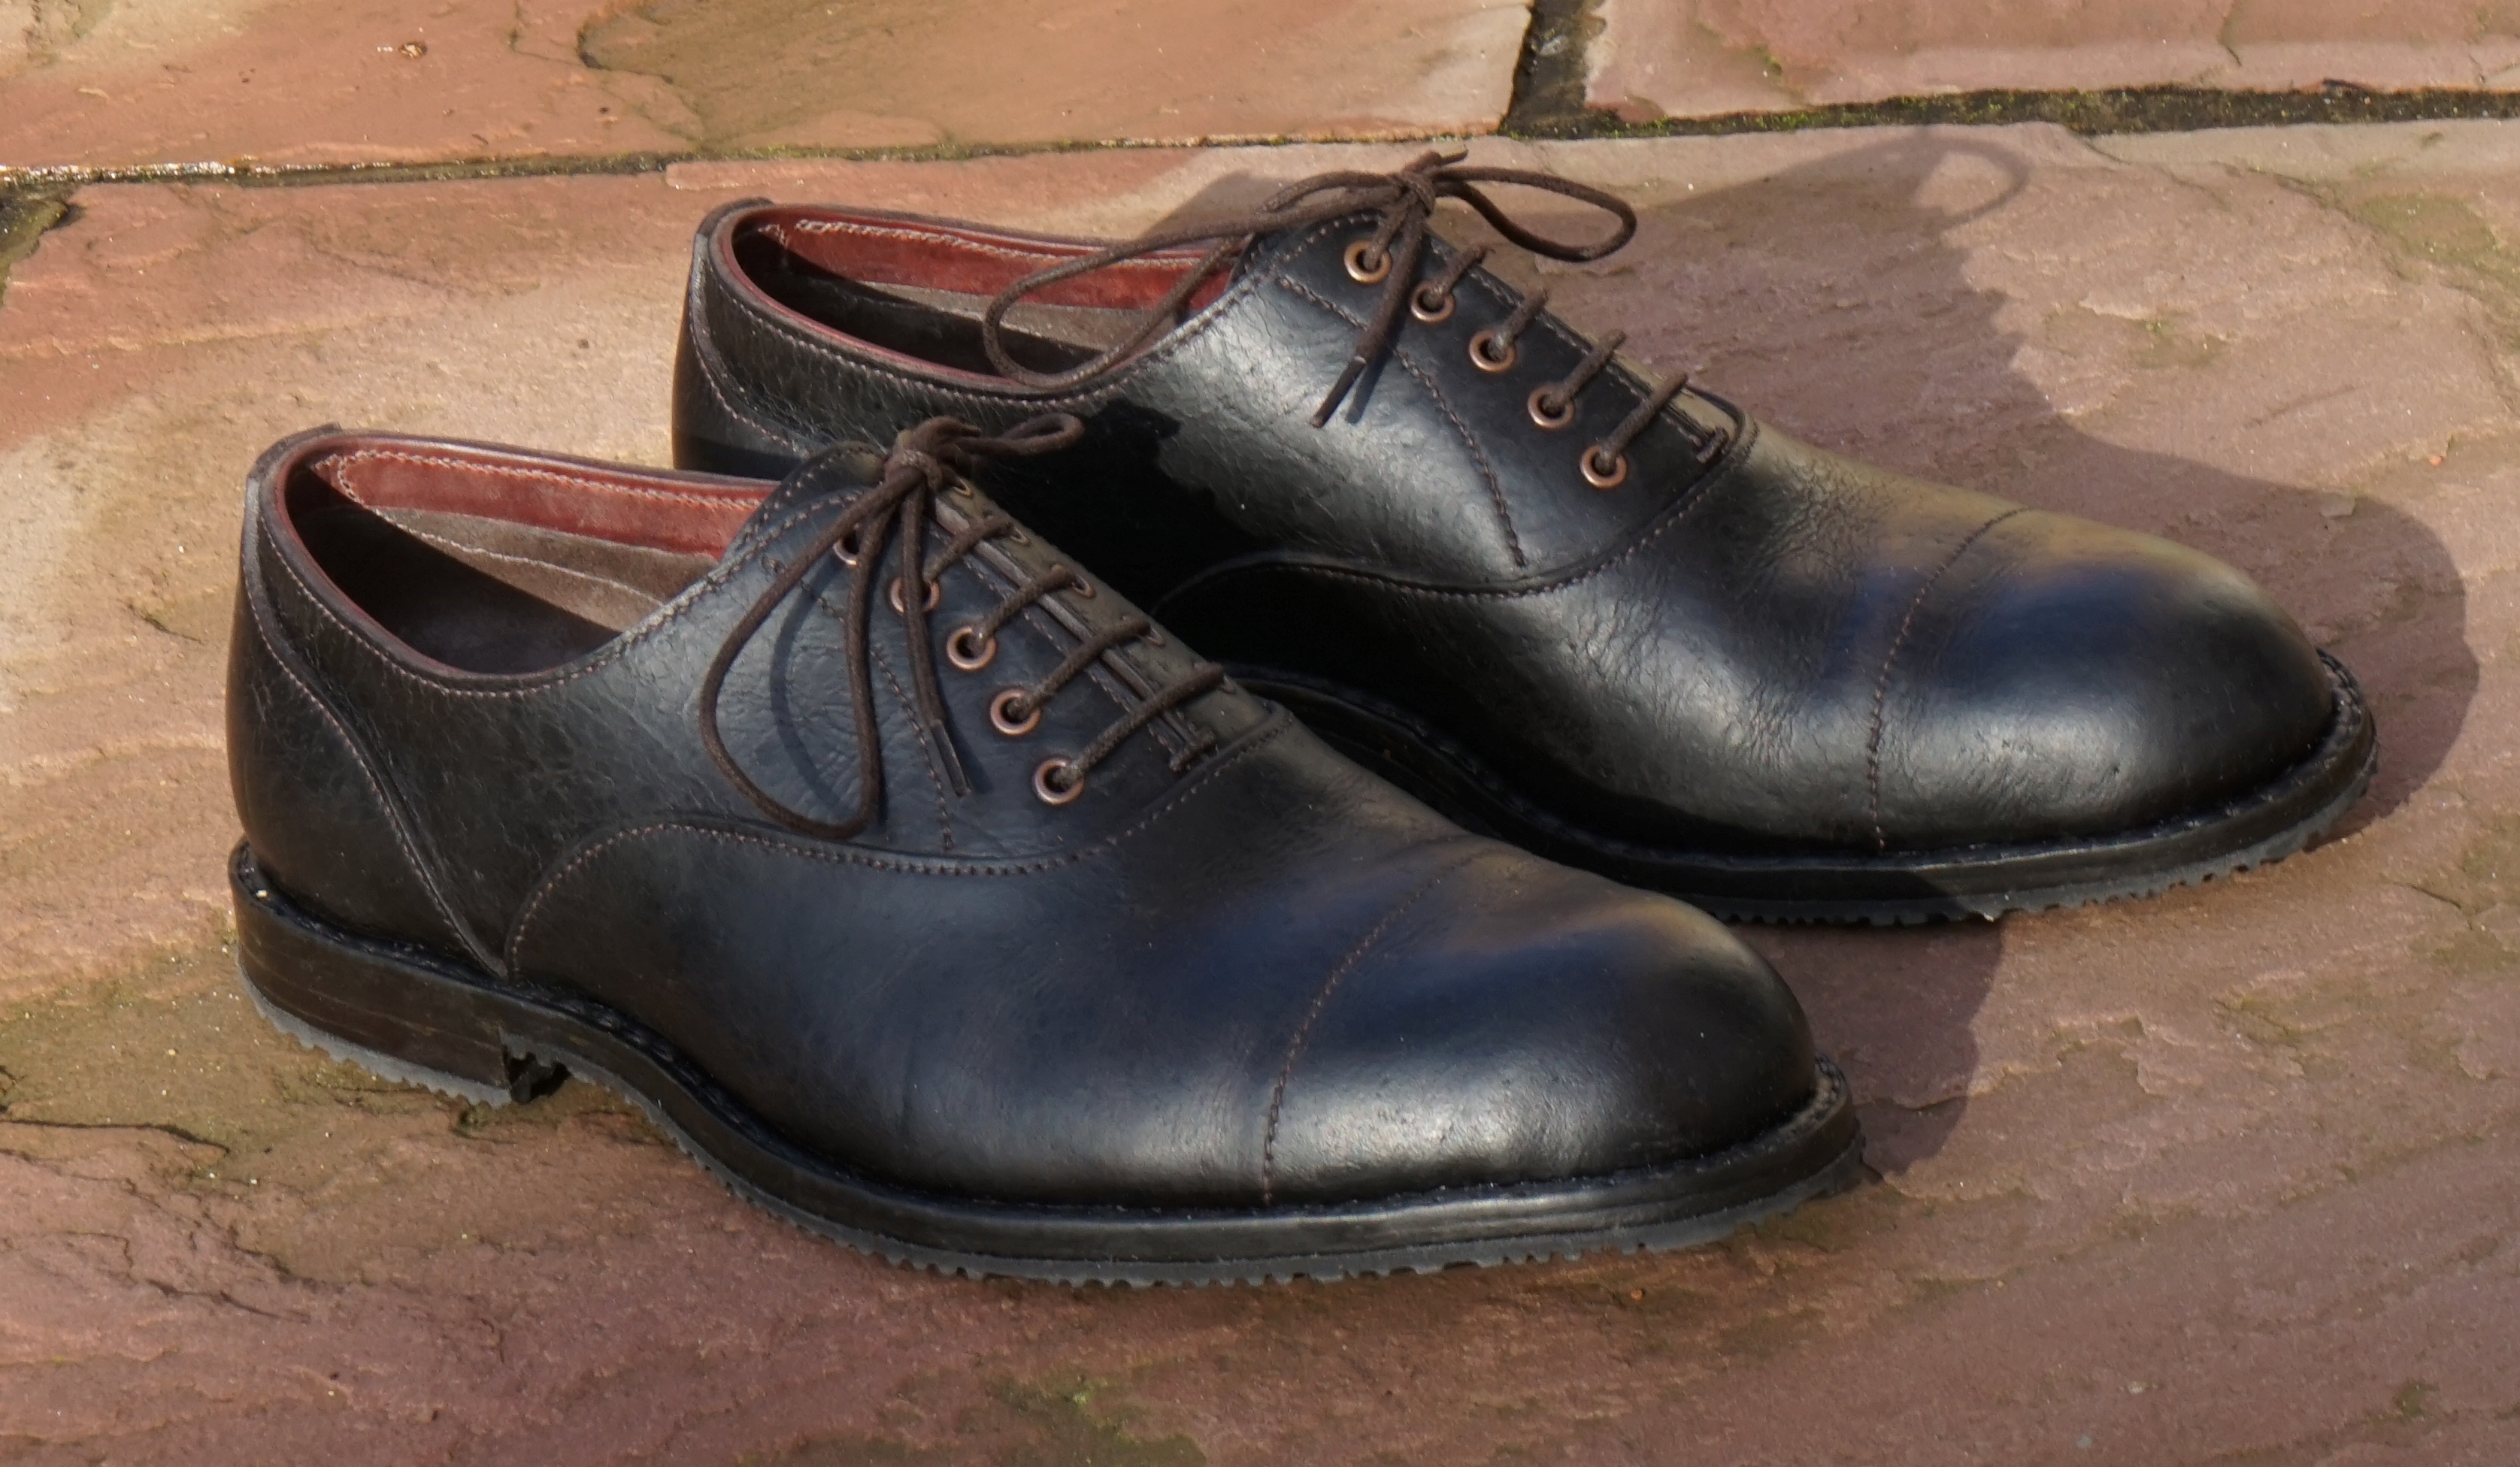 Gents Oxfords, unlined, with Vibram 7170 sole in CFS African Kudu - Stinkwood - made by Philip Bishop